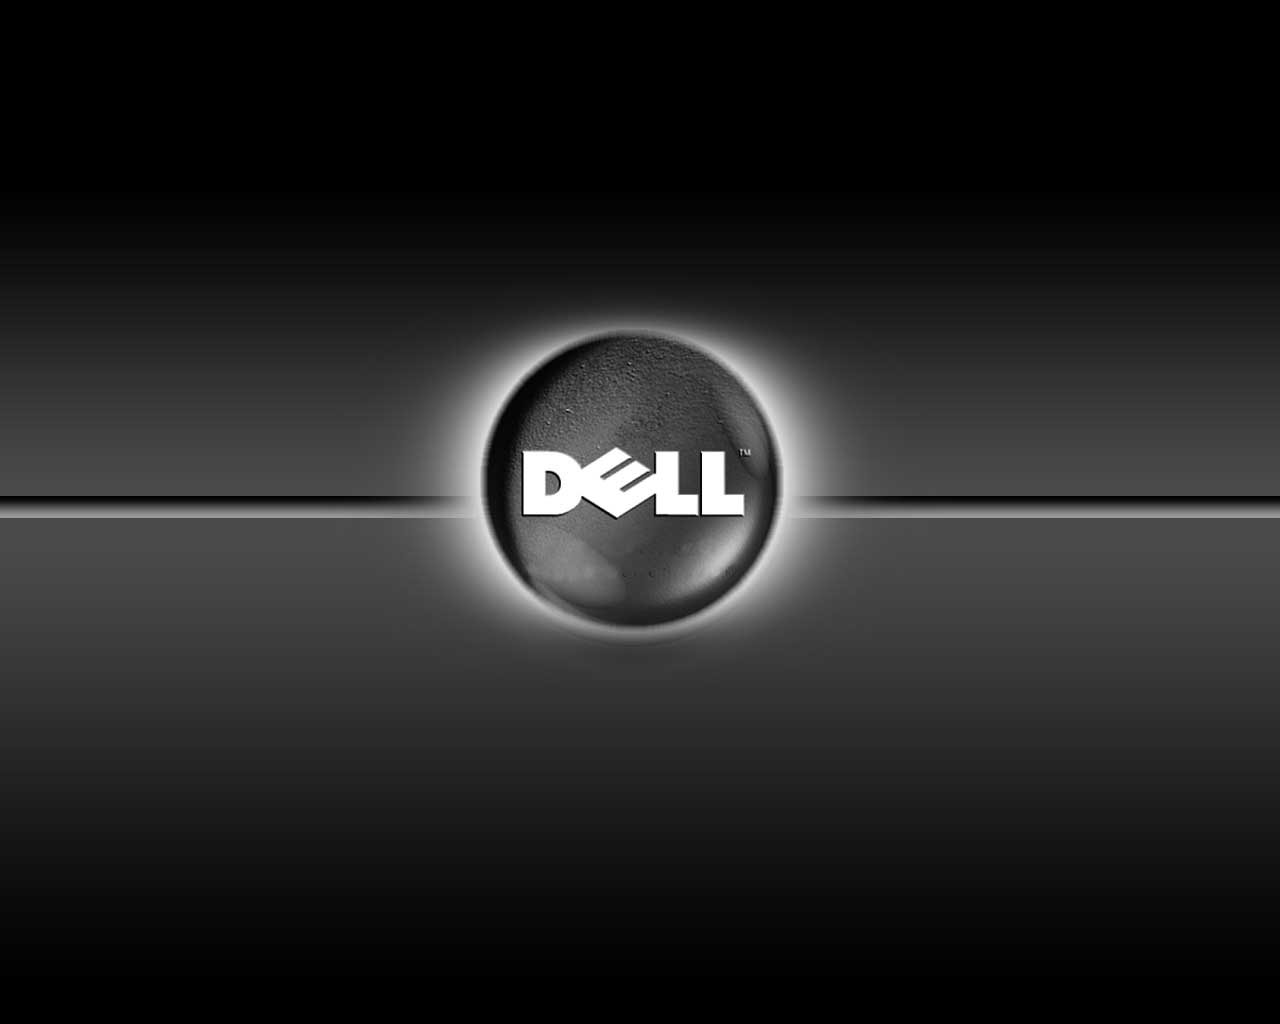 Wallpaper For Laptop, Dell Laptops Cool Windows Free Dell